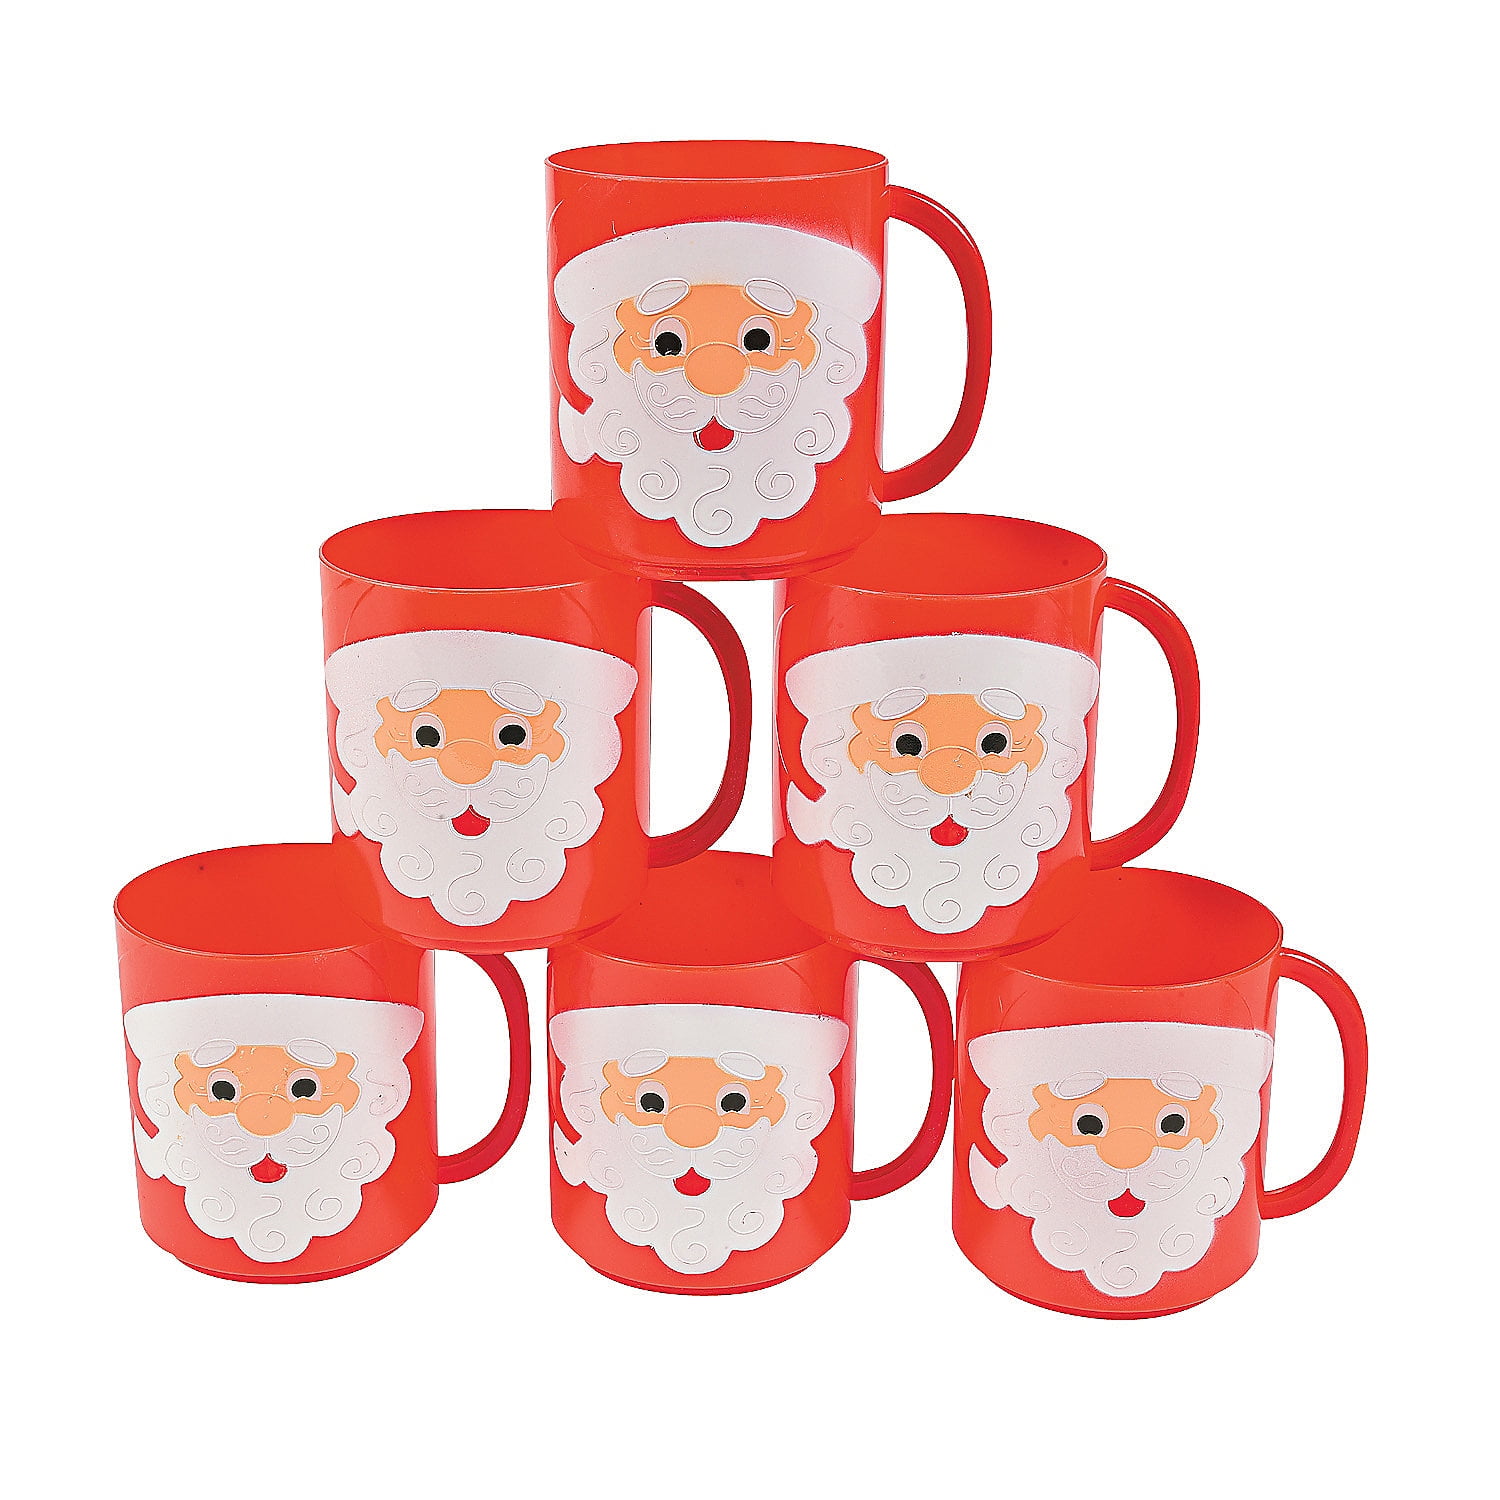 Fun Express Santa Disposable Plastic Cups (50 Cups) Holiday Party Supplies,  Drinkware, Favor Cups, T…See more Fun Express Santa Disposable Plastic